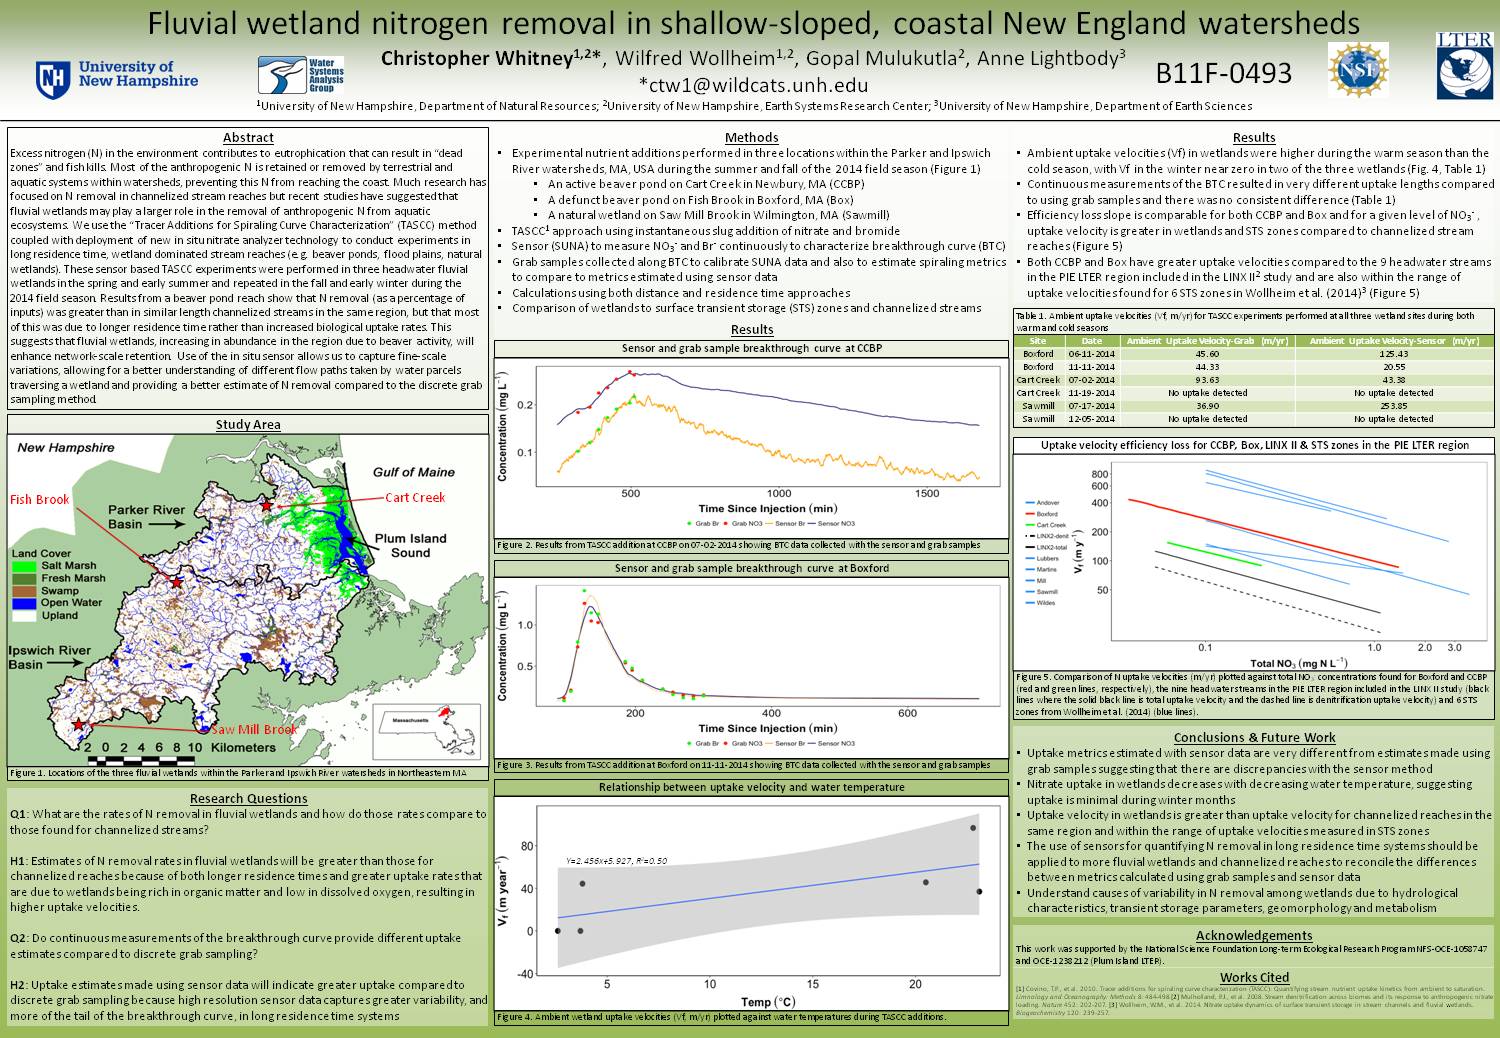 Fluvial Wetland Nitrogen Removal In Shallow-Sloped Coastal New England Watersheds by ctw1